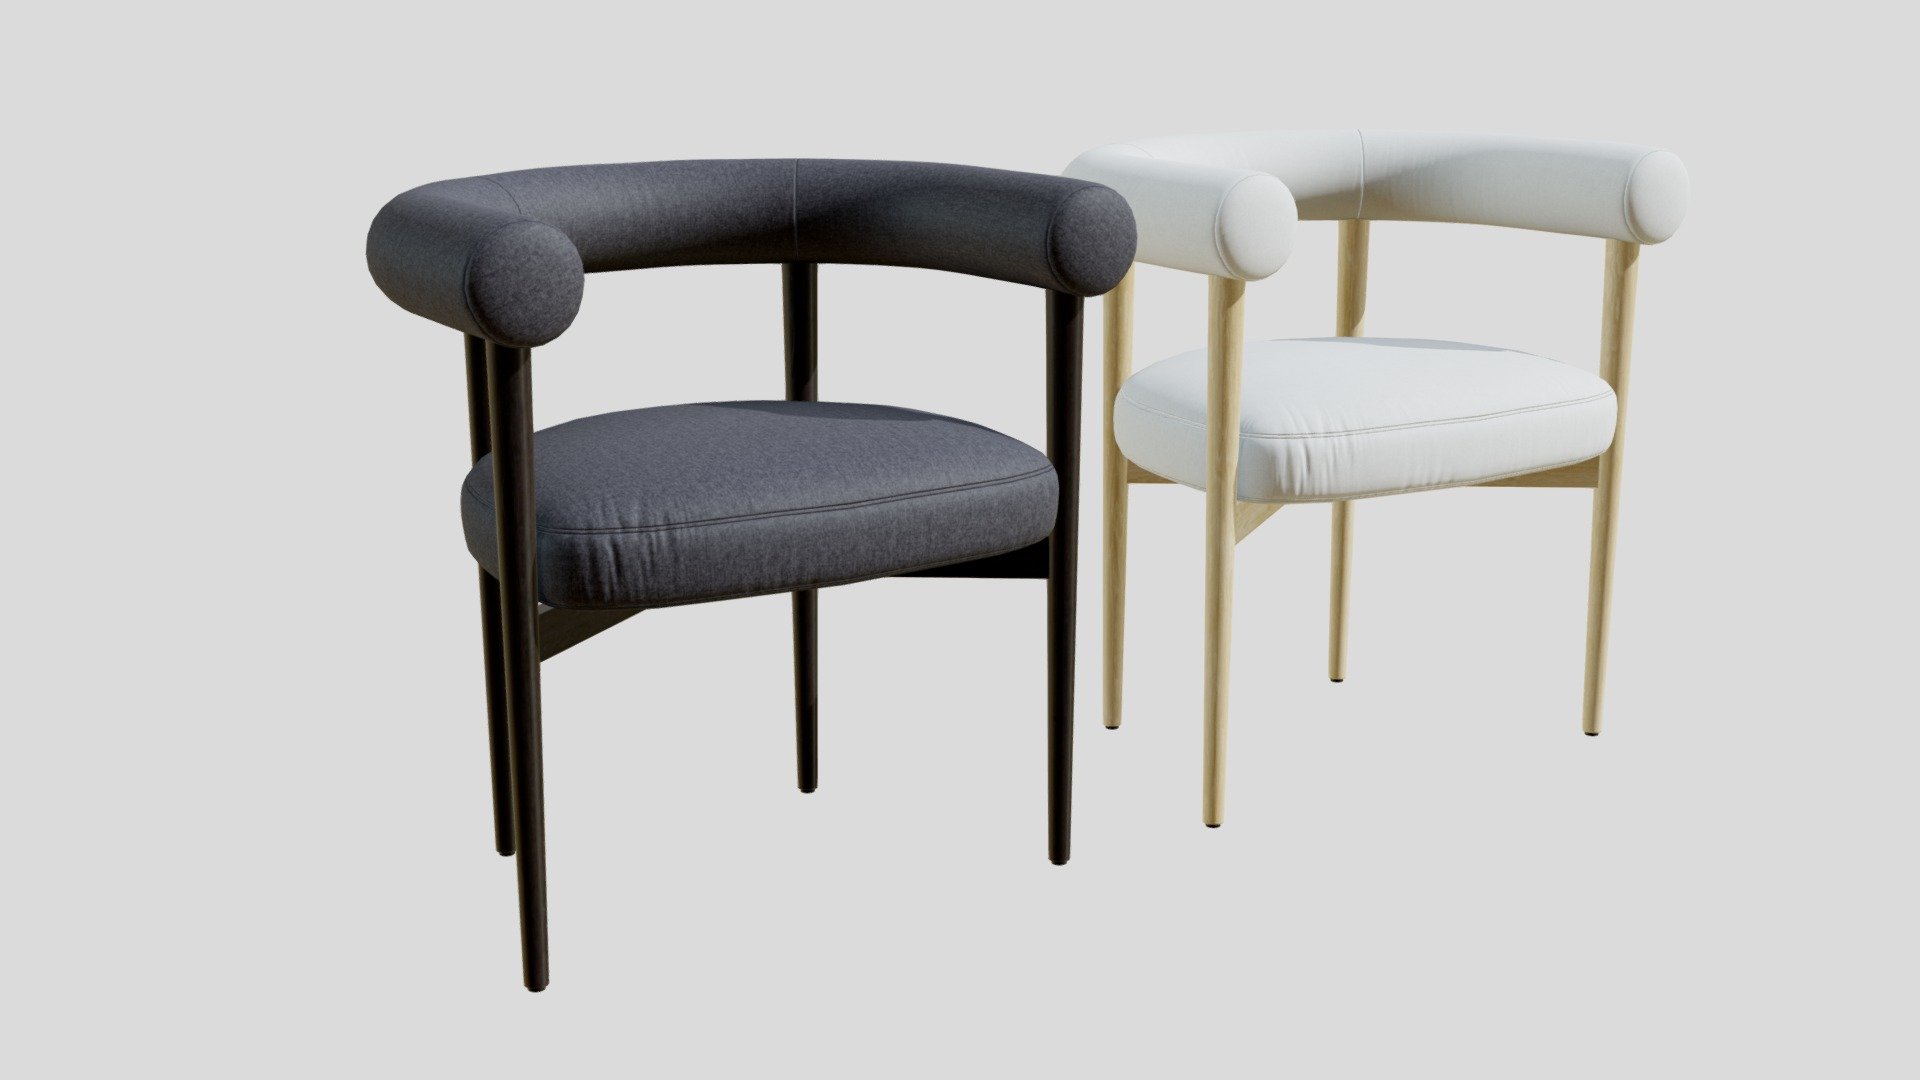 High-quality 3d model of a Crate and Barrel Mazz Curved Dining Chair by Leanne Ford.
2 colors

Original: https://www.crateandbarrel.com/mazz-charcoal-curved-dining-chair-by-leanne-ford/s434397

One chair contains: 
4078 polygons
4156 vertices - Crate&Barrel Mazz Dining Chair - Buy Royalty Free 3D model by 3detto 3d model